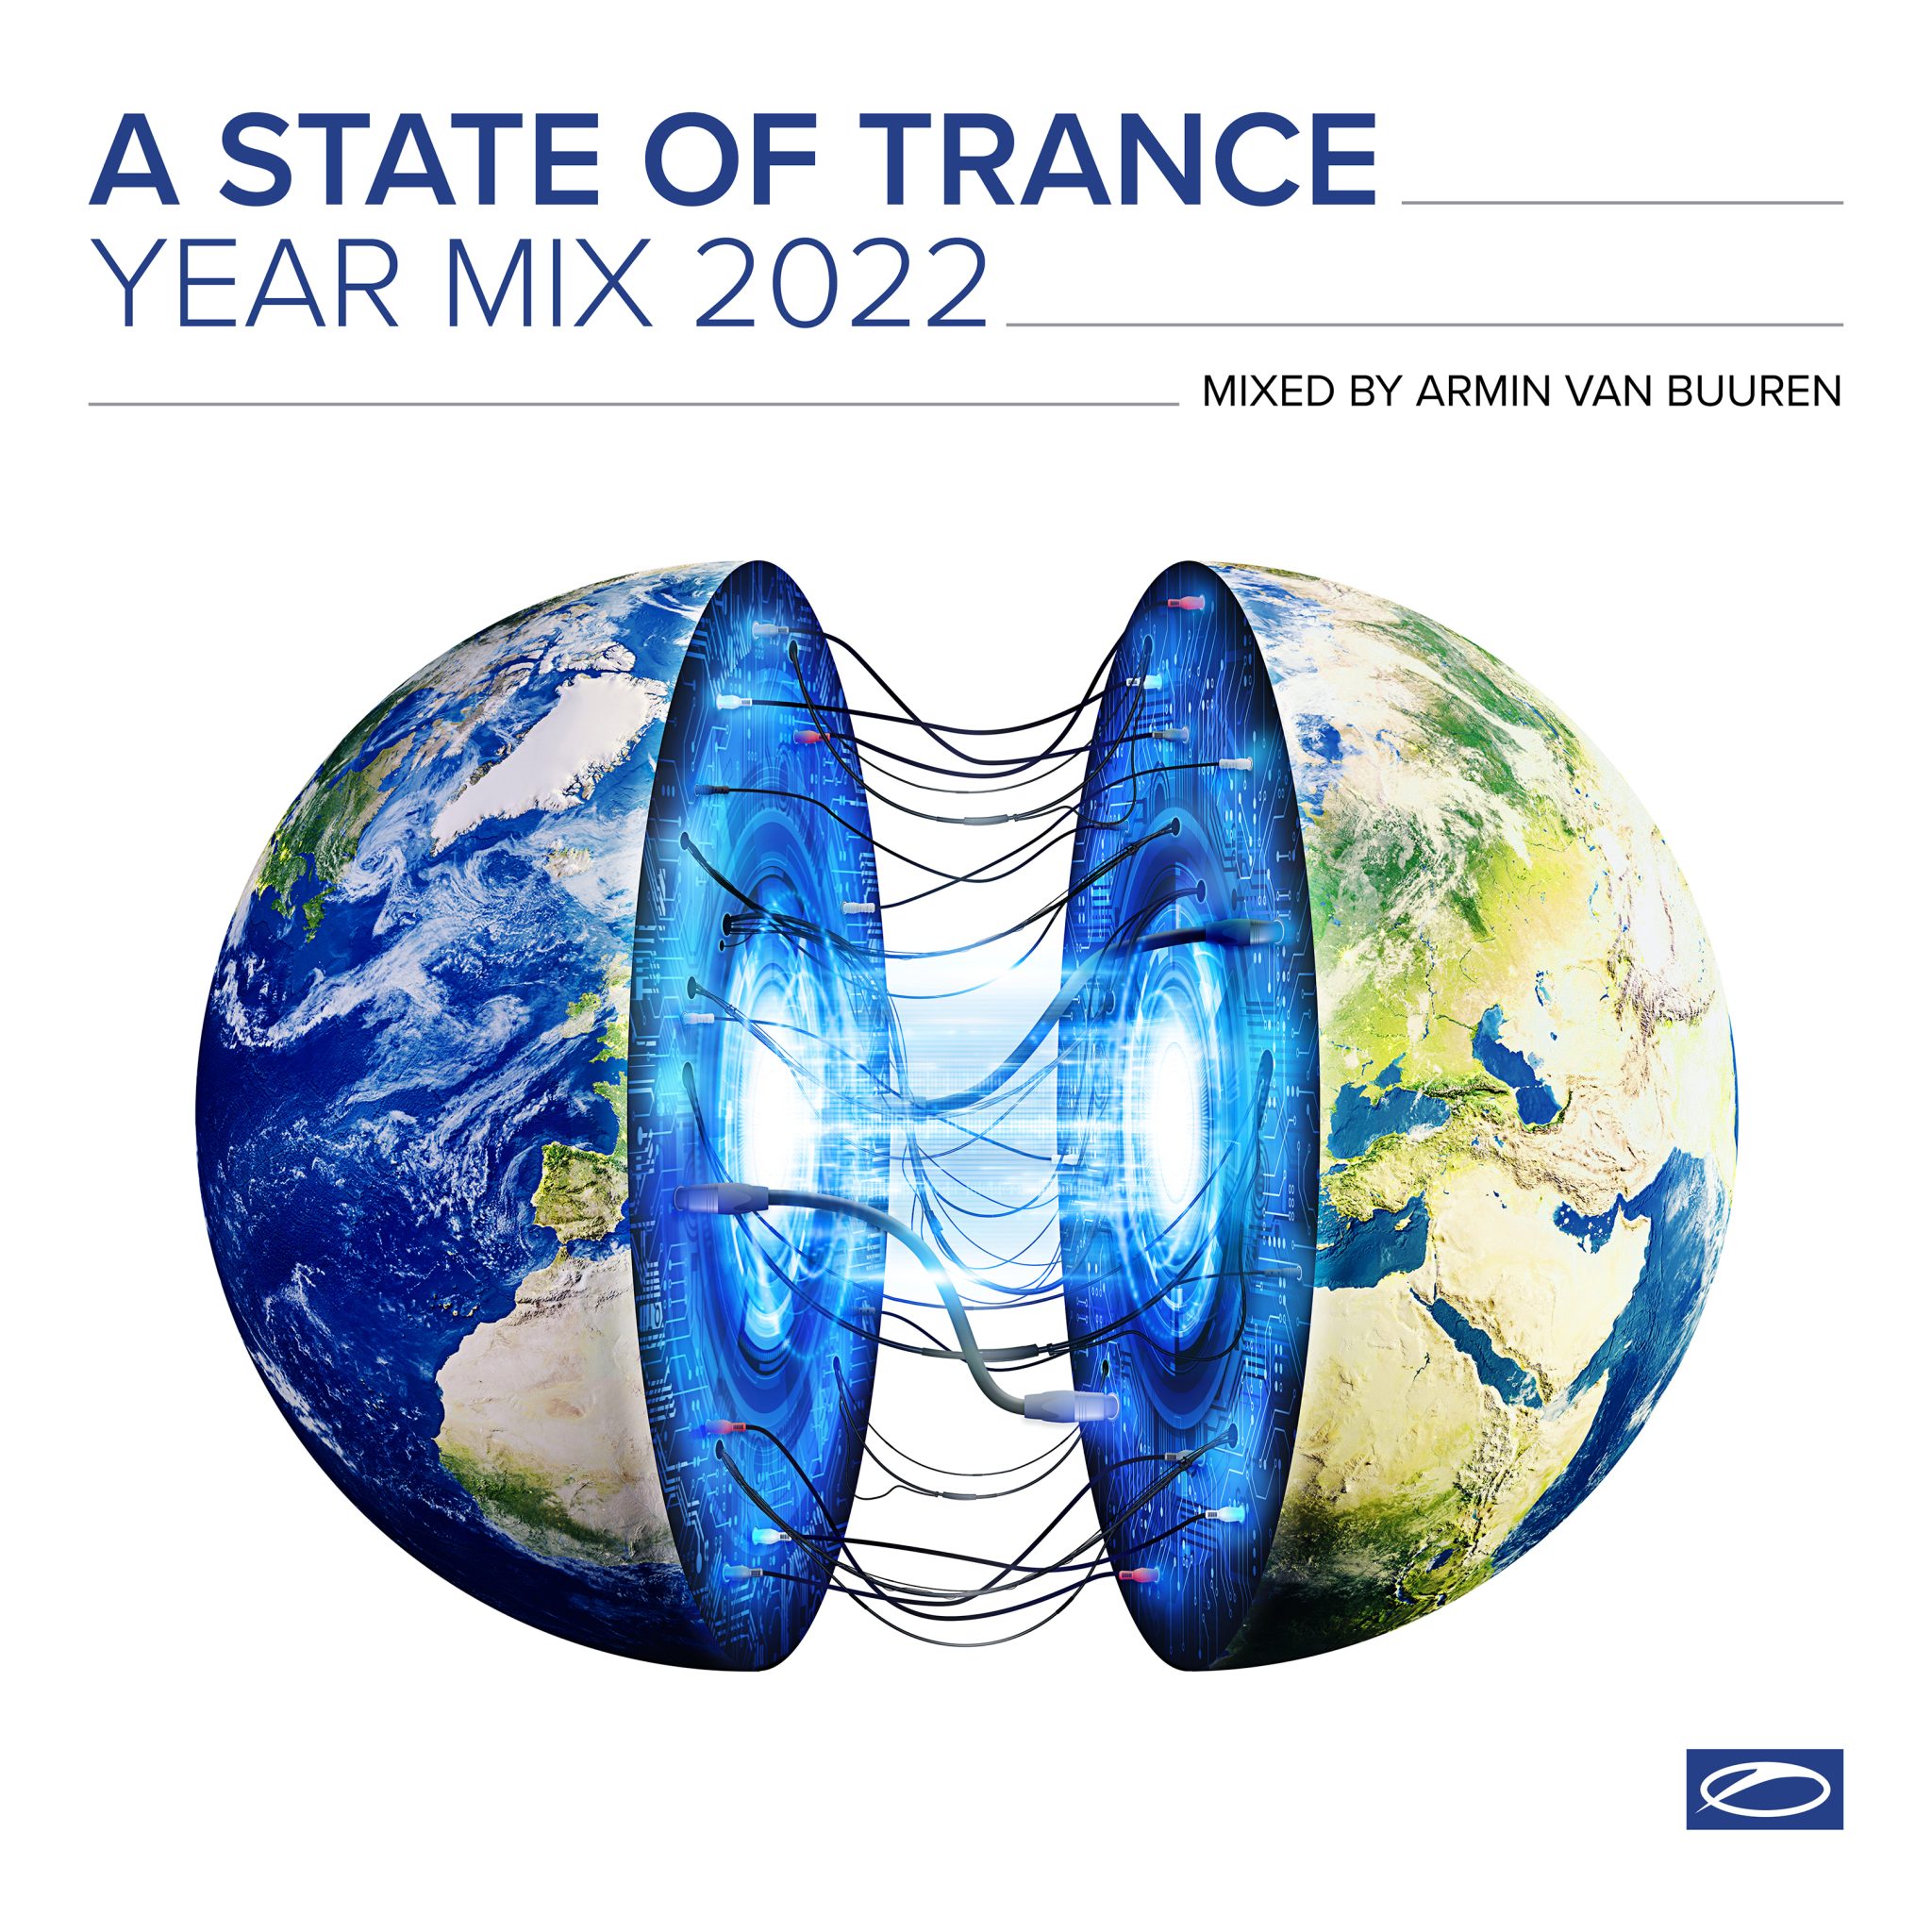 A State of Trance Year Mix 2022, Out Now! EDMTunes